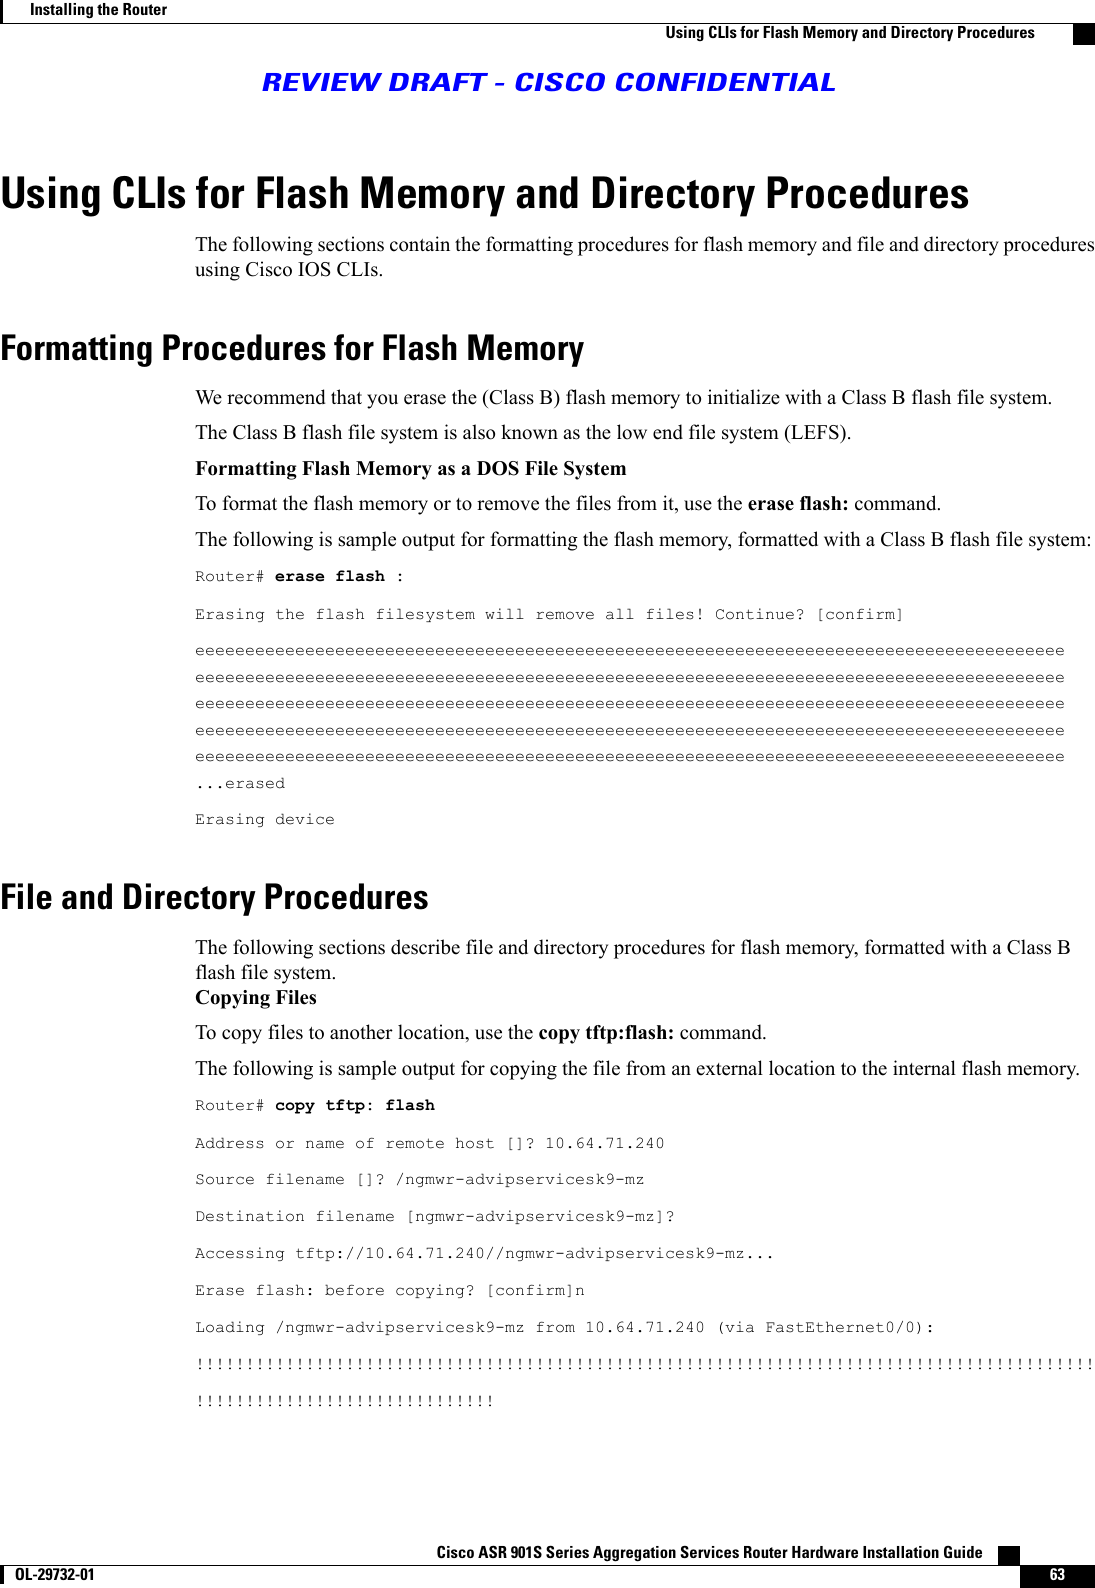 Using CLIs for Flash Memory and Directory ProceduresThe following sections contain the formatting procedures for flash memory and file and directory proceduresusing Cisco IOS CLIs.Formatting Procedures for Flash MemoryWe recommend that you erase the (Class B) flash memory to initialize with a Class B flash file system.The Class B flash file system is also known as the low end file system (LEFS).Formatting Flash Memory as a DOS File SystemTo format the flash memory or to remove the files from it, use the erase flash: command.The following is sample output for formatting the flash memory, formatted with a Class B flash file system:Router# erase flash :Erasing the flash filesystem will remove all files! Continue? [confirm]eeeeeeeeeeeeeeeeeeeeeeeeeeeeeeeeeeeeeeeeeeeeeeeeeeeeeeeeeeeeeeeeeeeeeeeeeeeeeeeeeeeeeeeeeeeeeeeeeeeeeeeeeeeeeeeeeeeeeeeeeeeeeeeeeeeeeeeeeeeeeeeeeeeeeeeeeeeeeeeeeeeeeeeeeeeeeeeeeeeeeeeeeeeeeeeeeeeeeeeeeeeeeeeeeeeeeeeeeeeeeeeeeeeeeeeeeeeeeeeeeeeeeeeeeeeeeeeeeeeeeeeeeeeeeeeeeeeeeeeeeeeeeeeeeeeeeeeeeeeeeeeeeeeeeeeeeeeeeeeeeeeeeeeeeeeeeeeeeeeeeeeeeeeeeeeeeeeeeeeeeeeeeeeeeeeeeeeeeeeeeeeeeeeeeeeeeeeeeeeeeeeeeeeeeeeeeeeeeeeeeeeeeeeeeeeeeee...erasedErasing deviceFile and Directory ProceduresThe following sections describe file and directory procedures for flash memory, formatted with a Class Bflash file system.Copying FilesTo copy files to another location, use the copy tftp:flash: command.The following is sample output for copying the file from an external location to the internal flash memory.Router# copy tftp: flashAddress or name of remote host []? 10.64.71.240Source filename []? /ngmwr-advipservicesk9-mzDestination filename [ngmwr-advipservicesk9-mz]?Accessing tftp://10.64.71.240//ngmwr-advipservicesk9-mz...Erase flash: before copying? [confirm]nLoading /ngmwr-advipservicesk9-mz from 10.64.71.240 (via FastEthernet0/0):!!!!!!!!!!!!!!!!!!!!!!!!!!!!!!!!!!!!!!!!!!!!!!!!!!!!!!!!!!!!!!!!!!!!!!!!!!!!!!!!!!!!!!!!!!!!!!!!!!!!!!!!!!!!!!!!!!!!!!!!Cisco ASR 901S Series Aggregation Services Router Hardware Installation Guide       OL-29732-01 63Installing the RouterUsing CLIs for Flash Memory and Directory ProceduresREVIEW DRAFT - CISCO CONFIDENTIAL